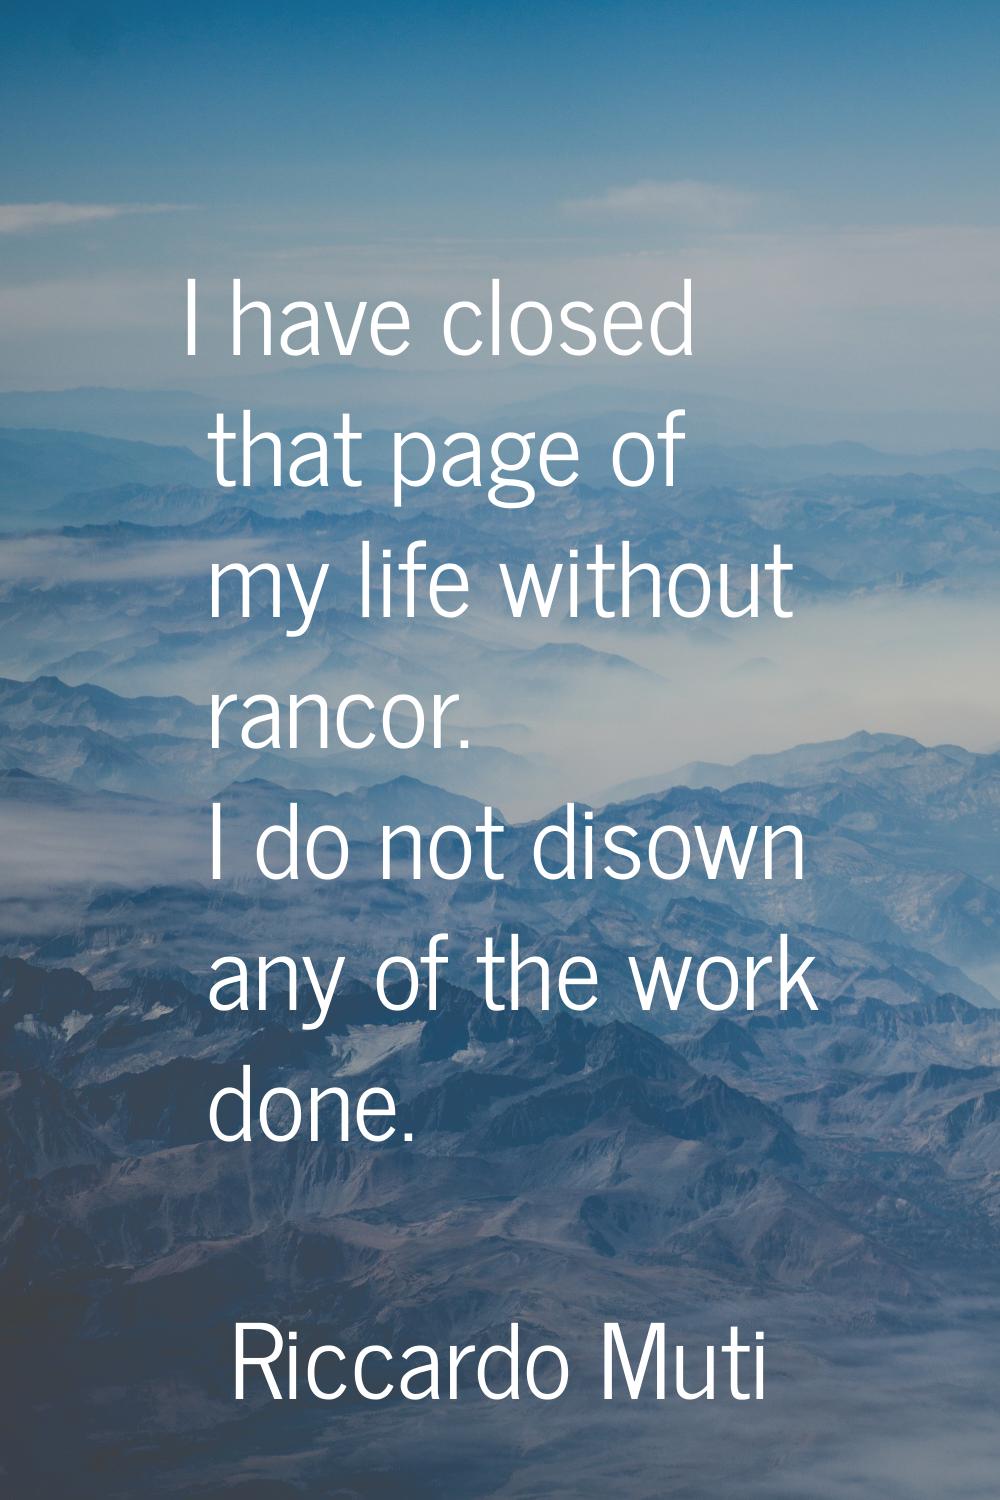 I have closed that page of my life without rancor. I do not disown any of the work done.